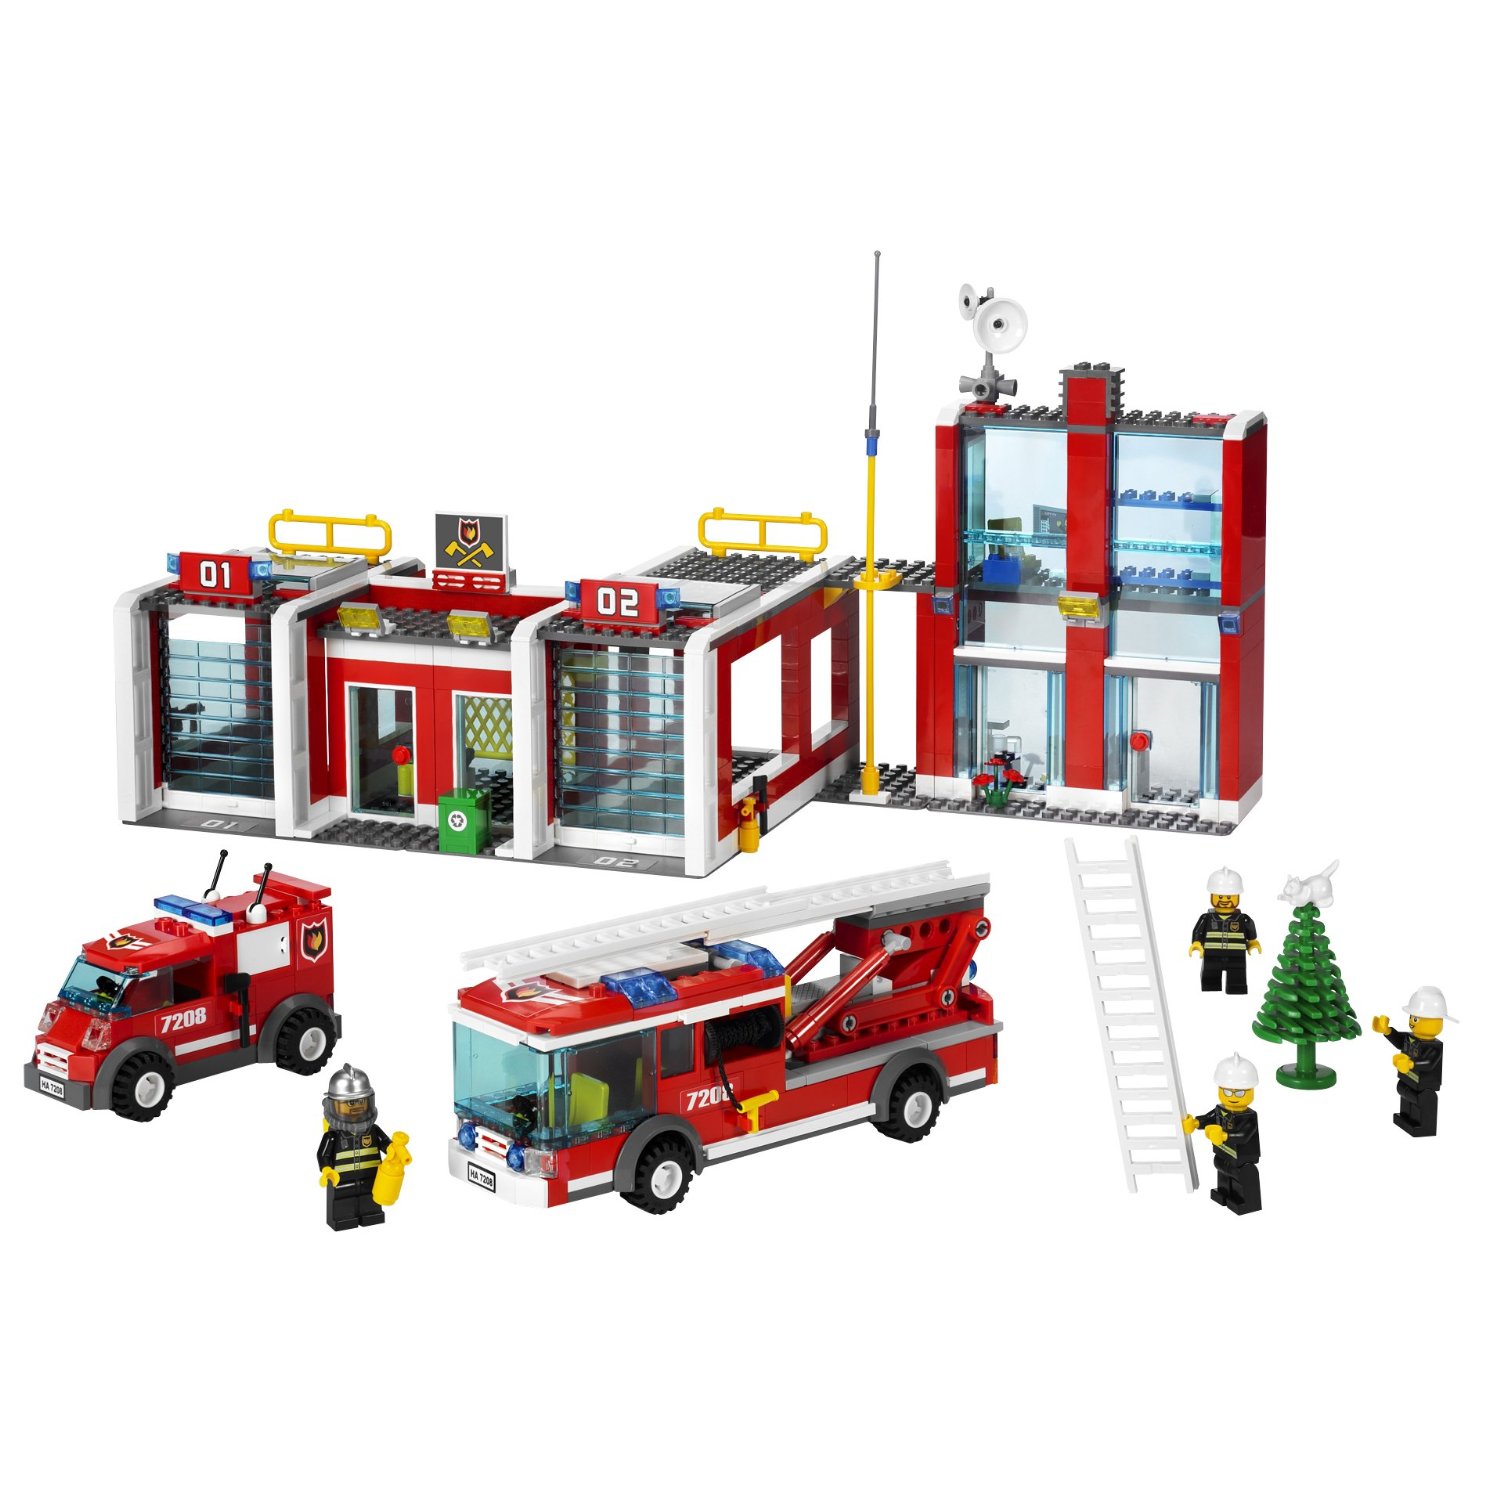 LEGO City Fire Station 7208 Building Toy